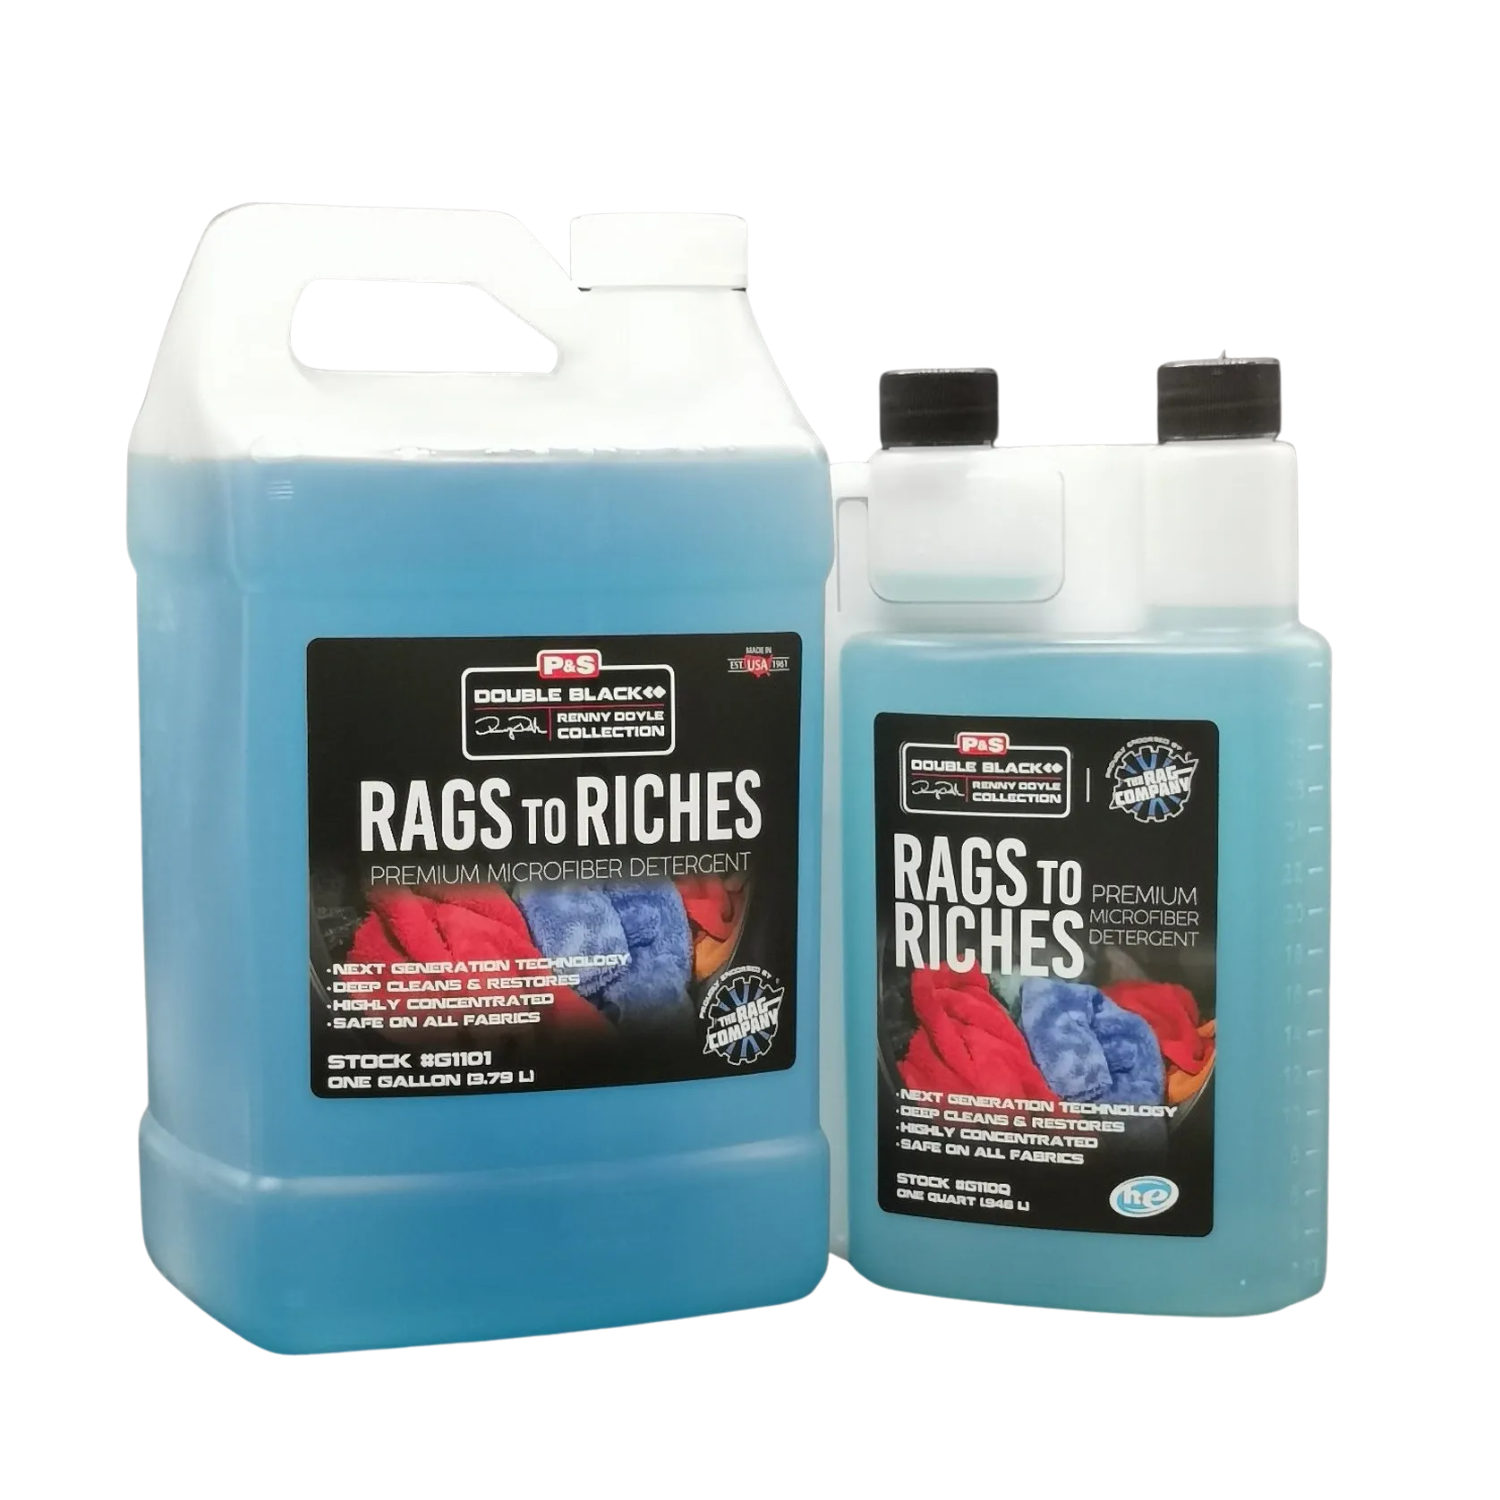 P&S Rags to Riches - MF Wash